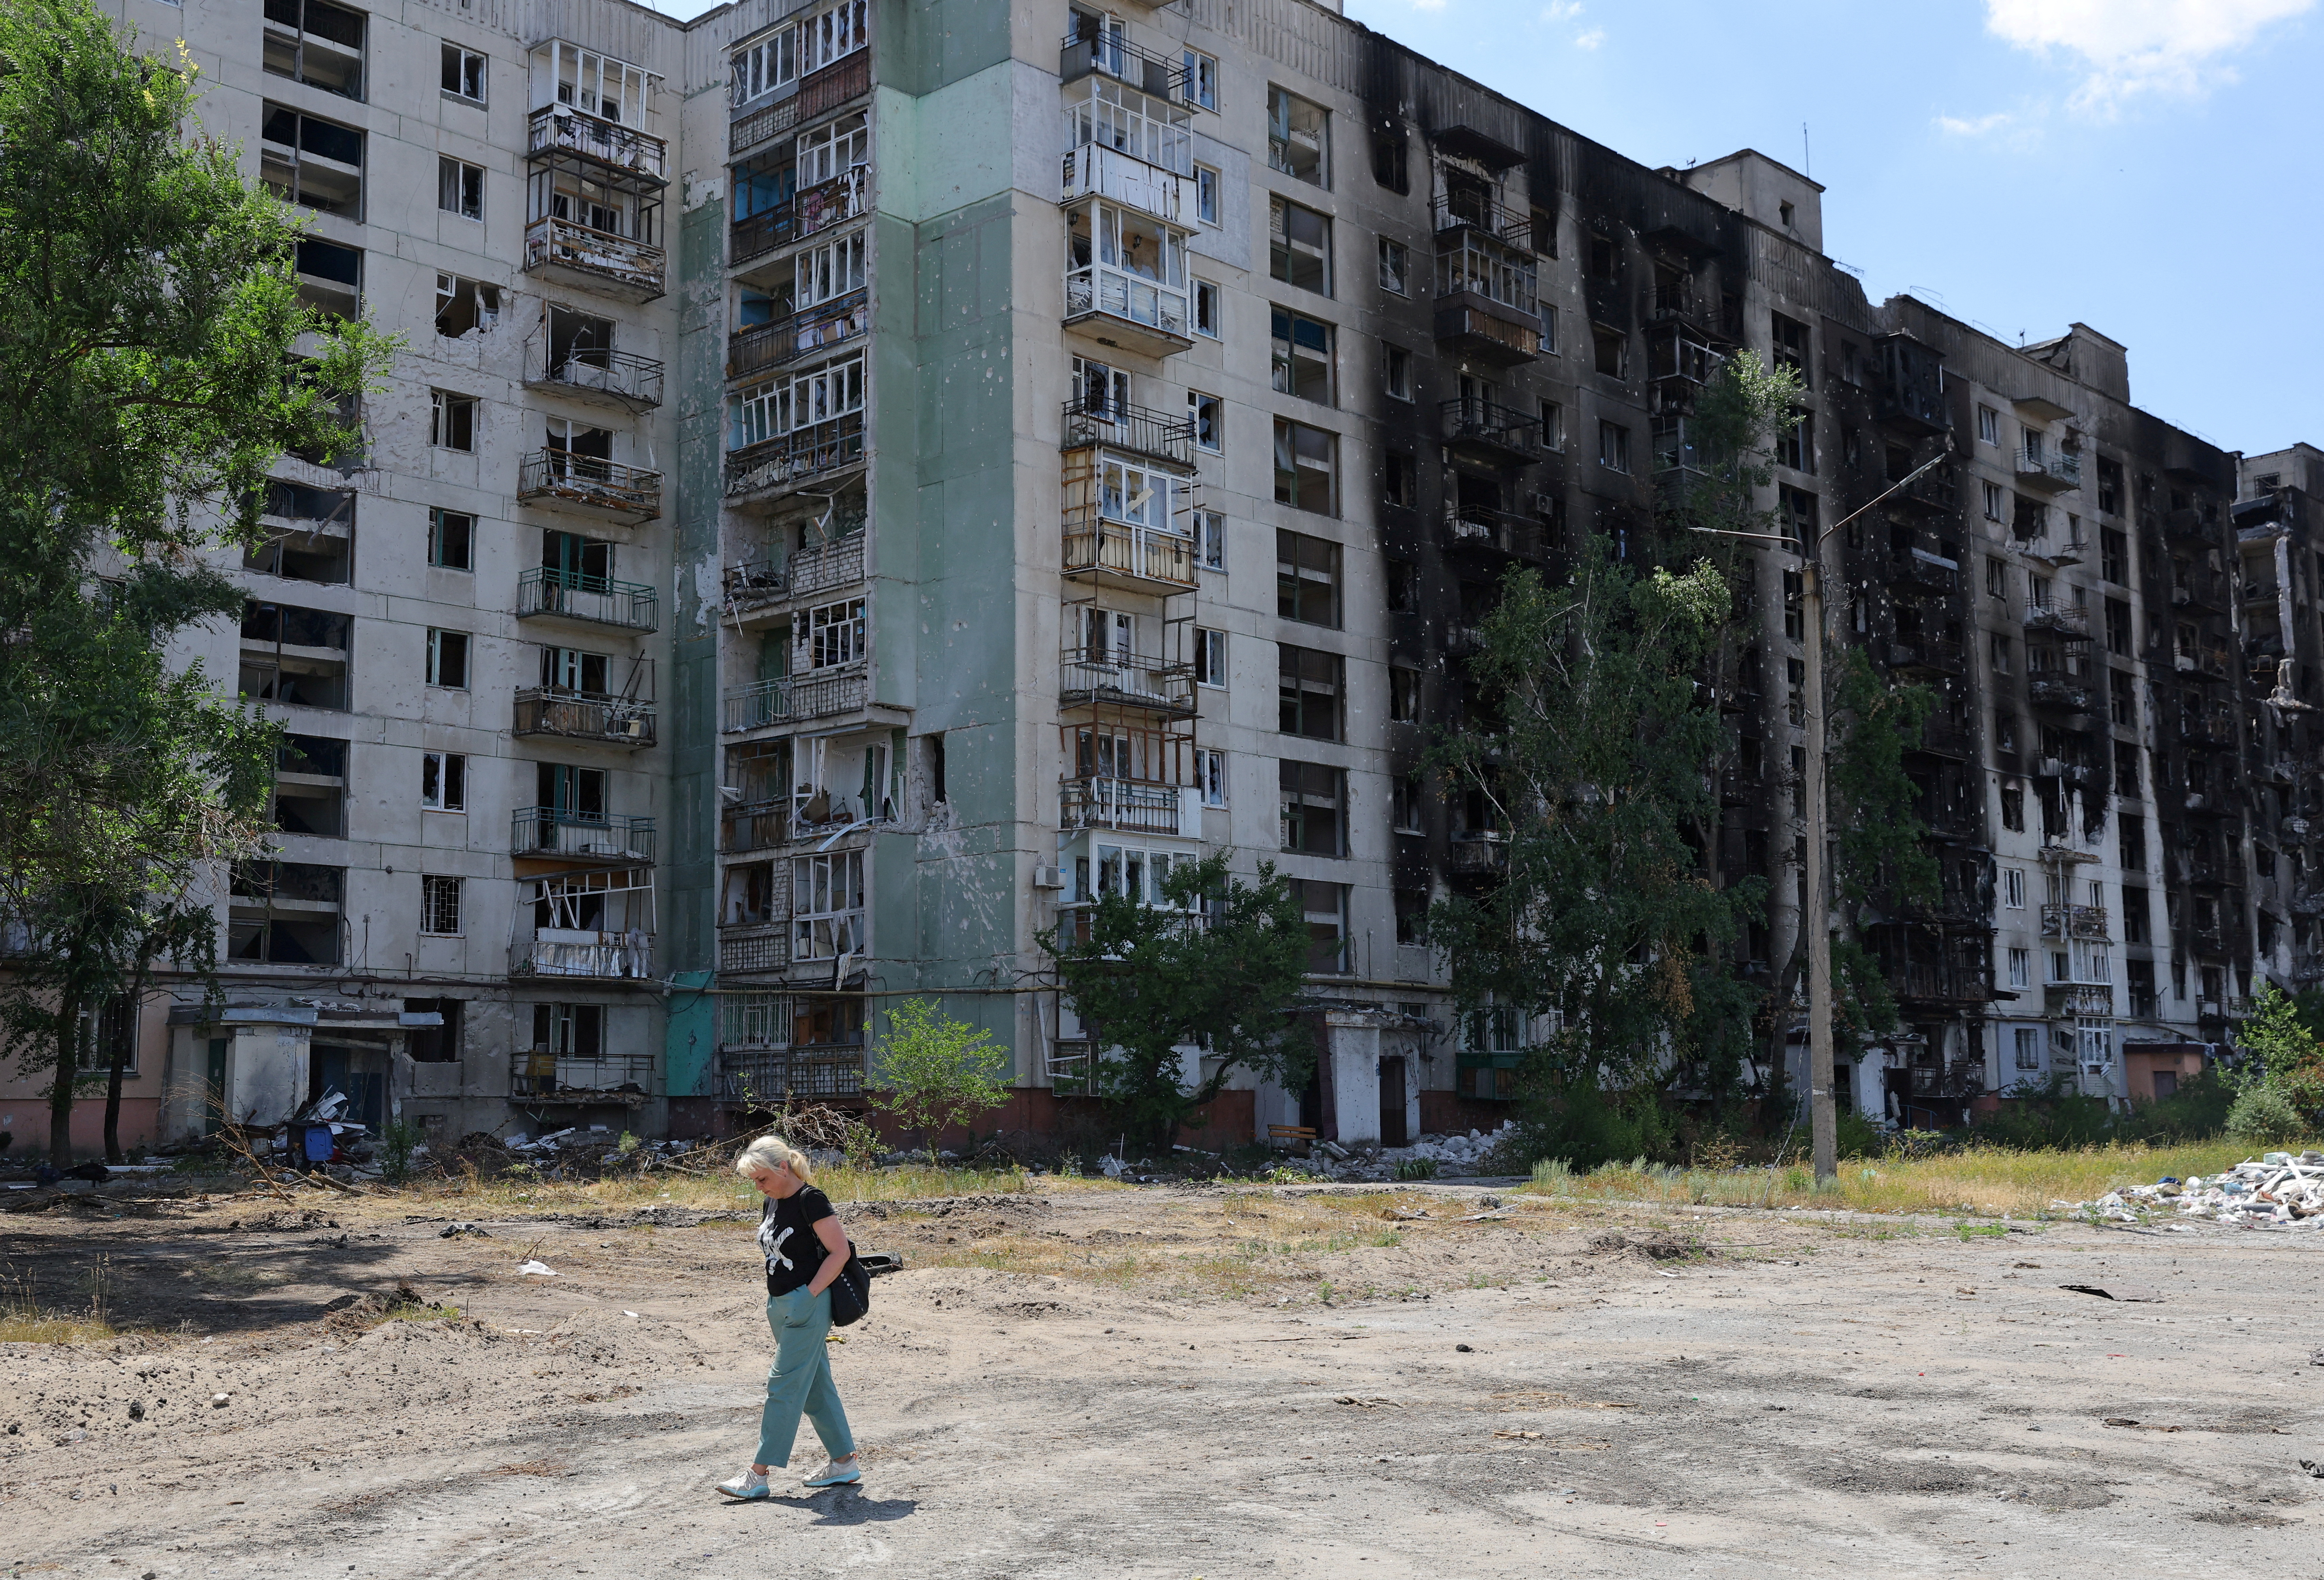 A local resident walks past a heavily damaged apartment building in Sievierodonetsk